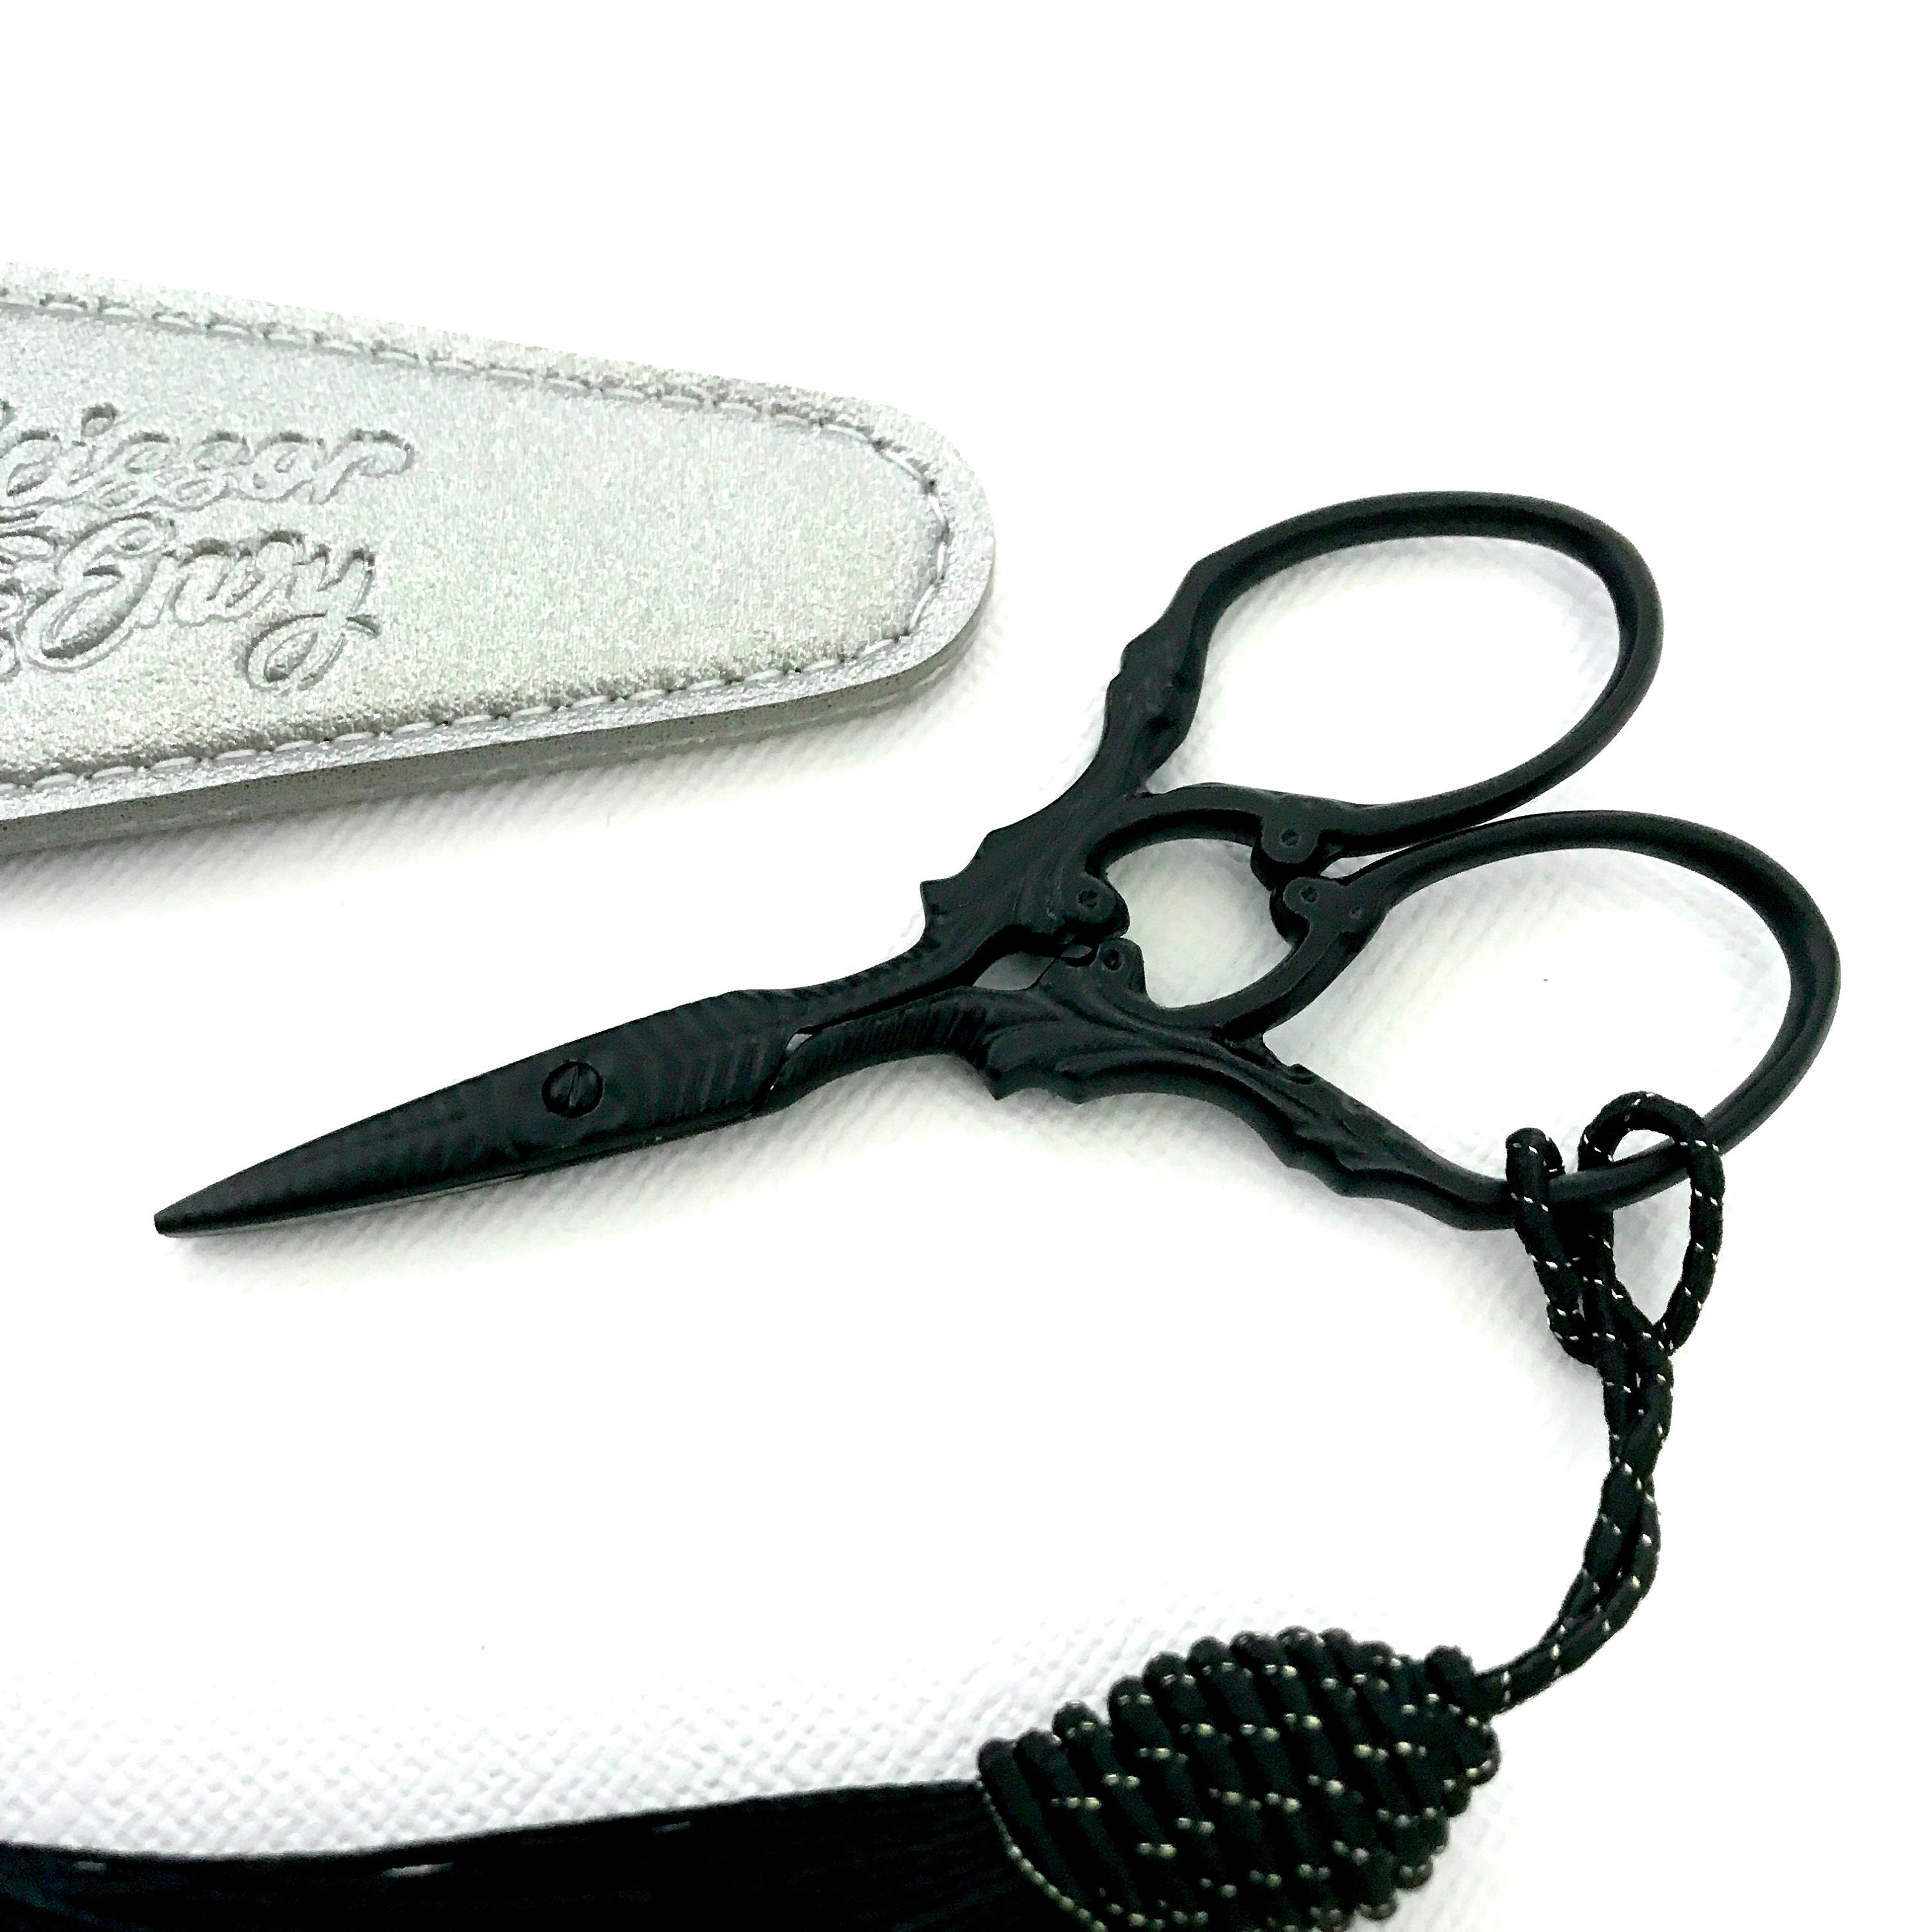 Small Black Embroidery Scissors With Round Circular Handles